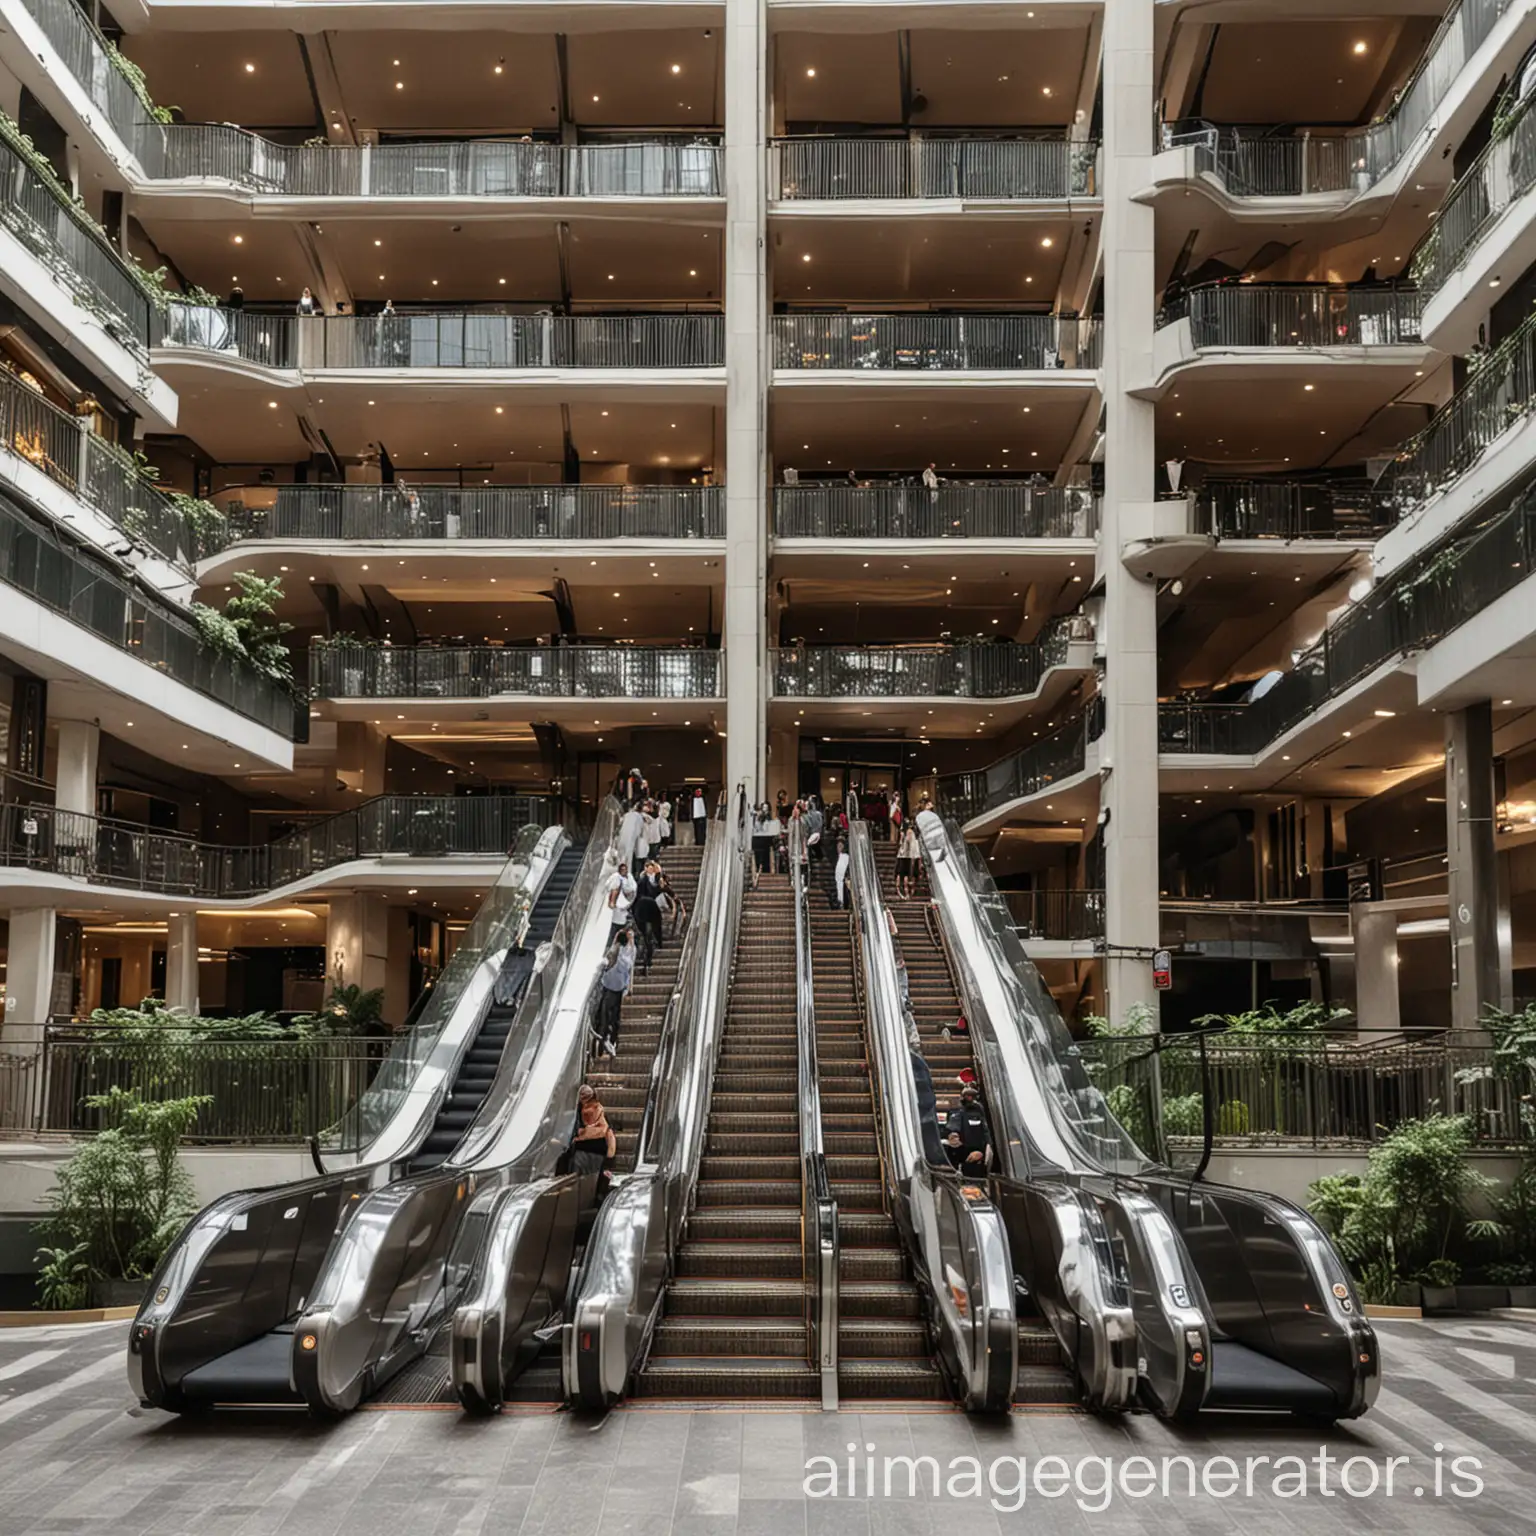 Luxury-Hotel-and-Restaurant-with-Escalator-Entrance-and-Parking-Lot